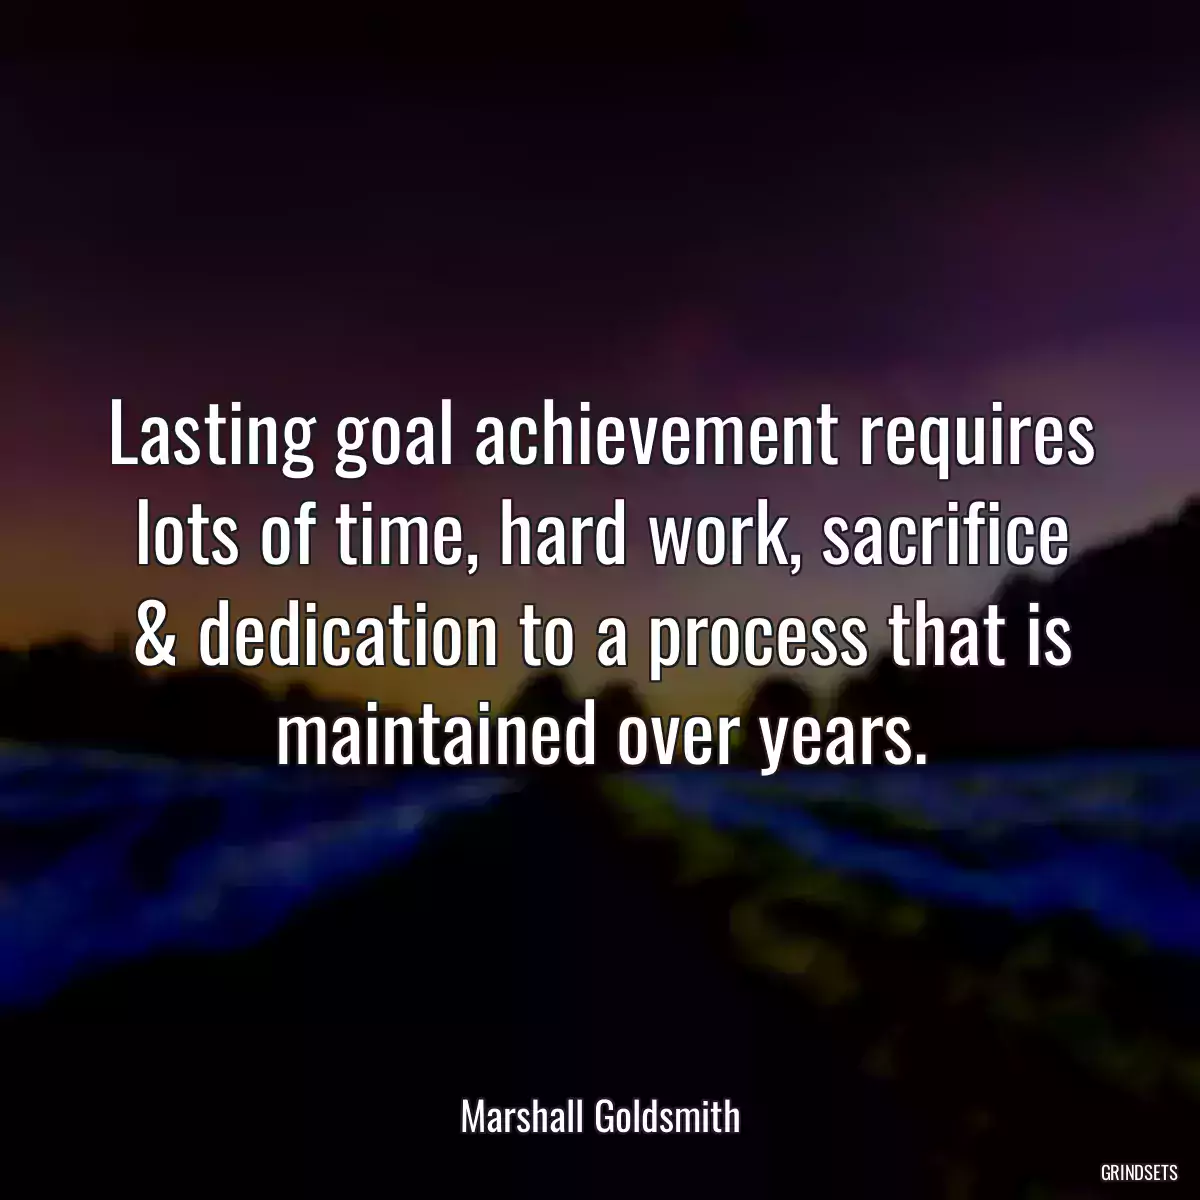 Lasting goal achievement requires lots of time, hard work, sacrifice & dedication to a process that is maintained over years.